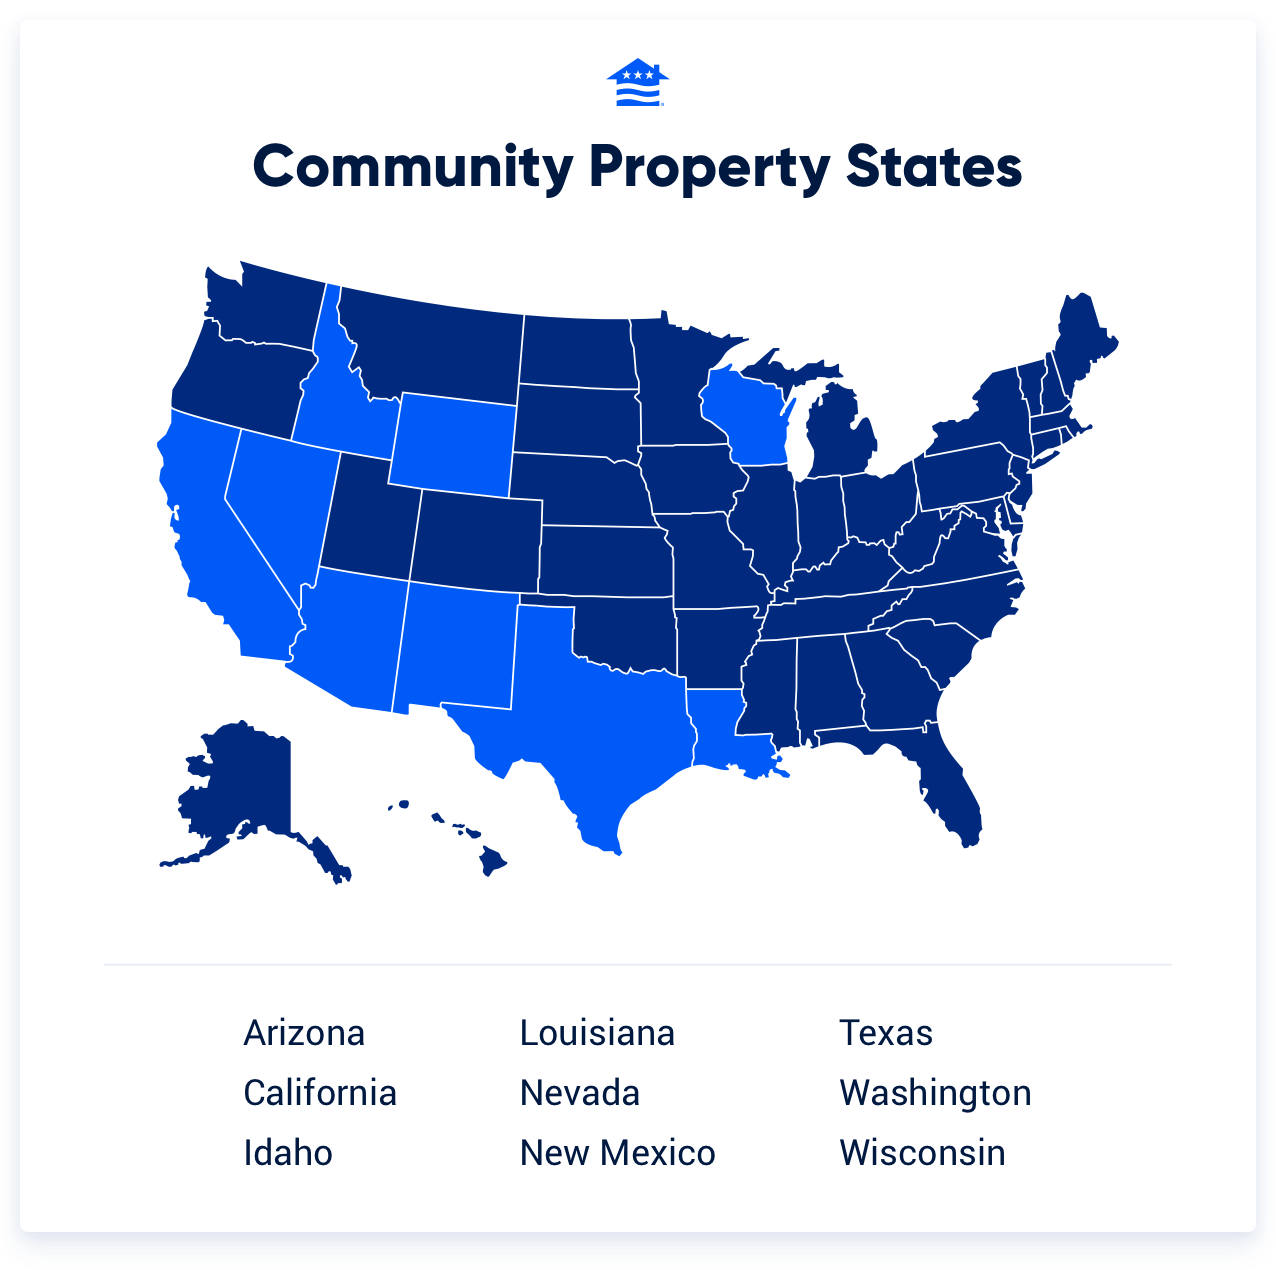 An illustration highlighting the community property states in the U.S. 